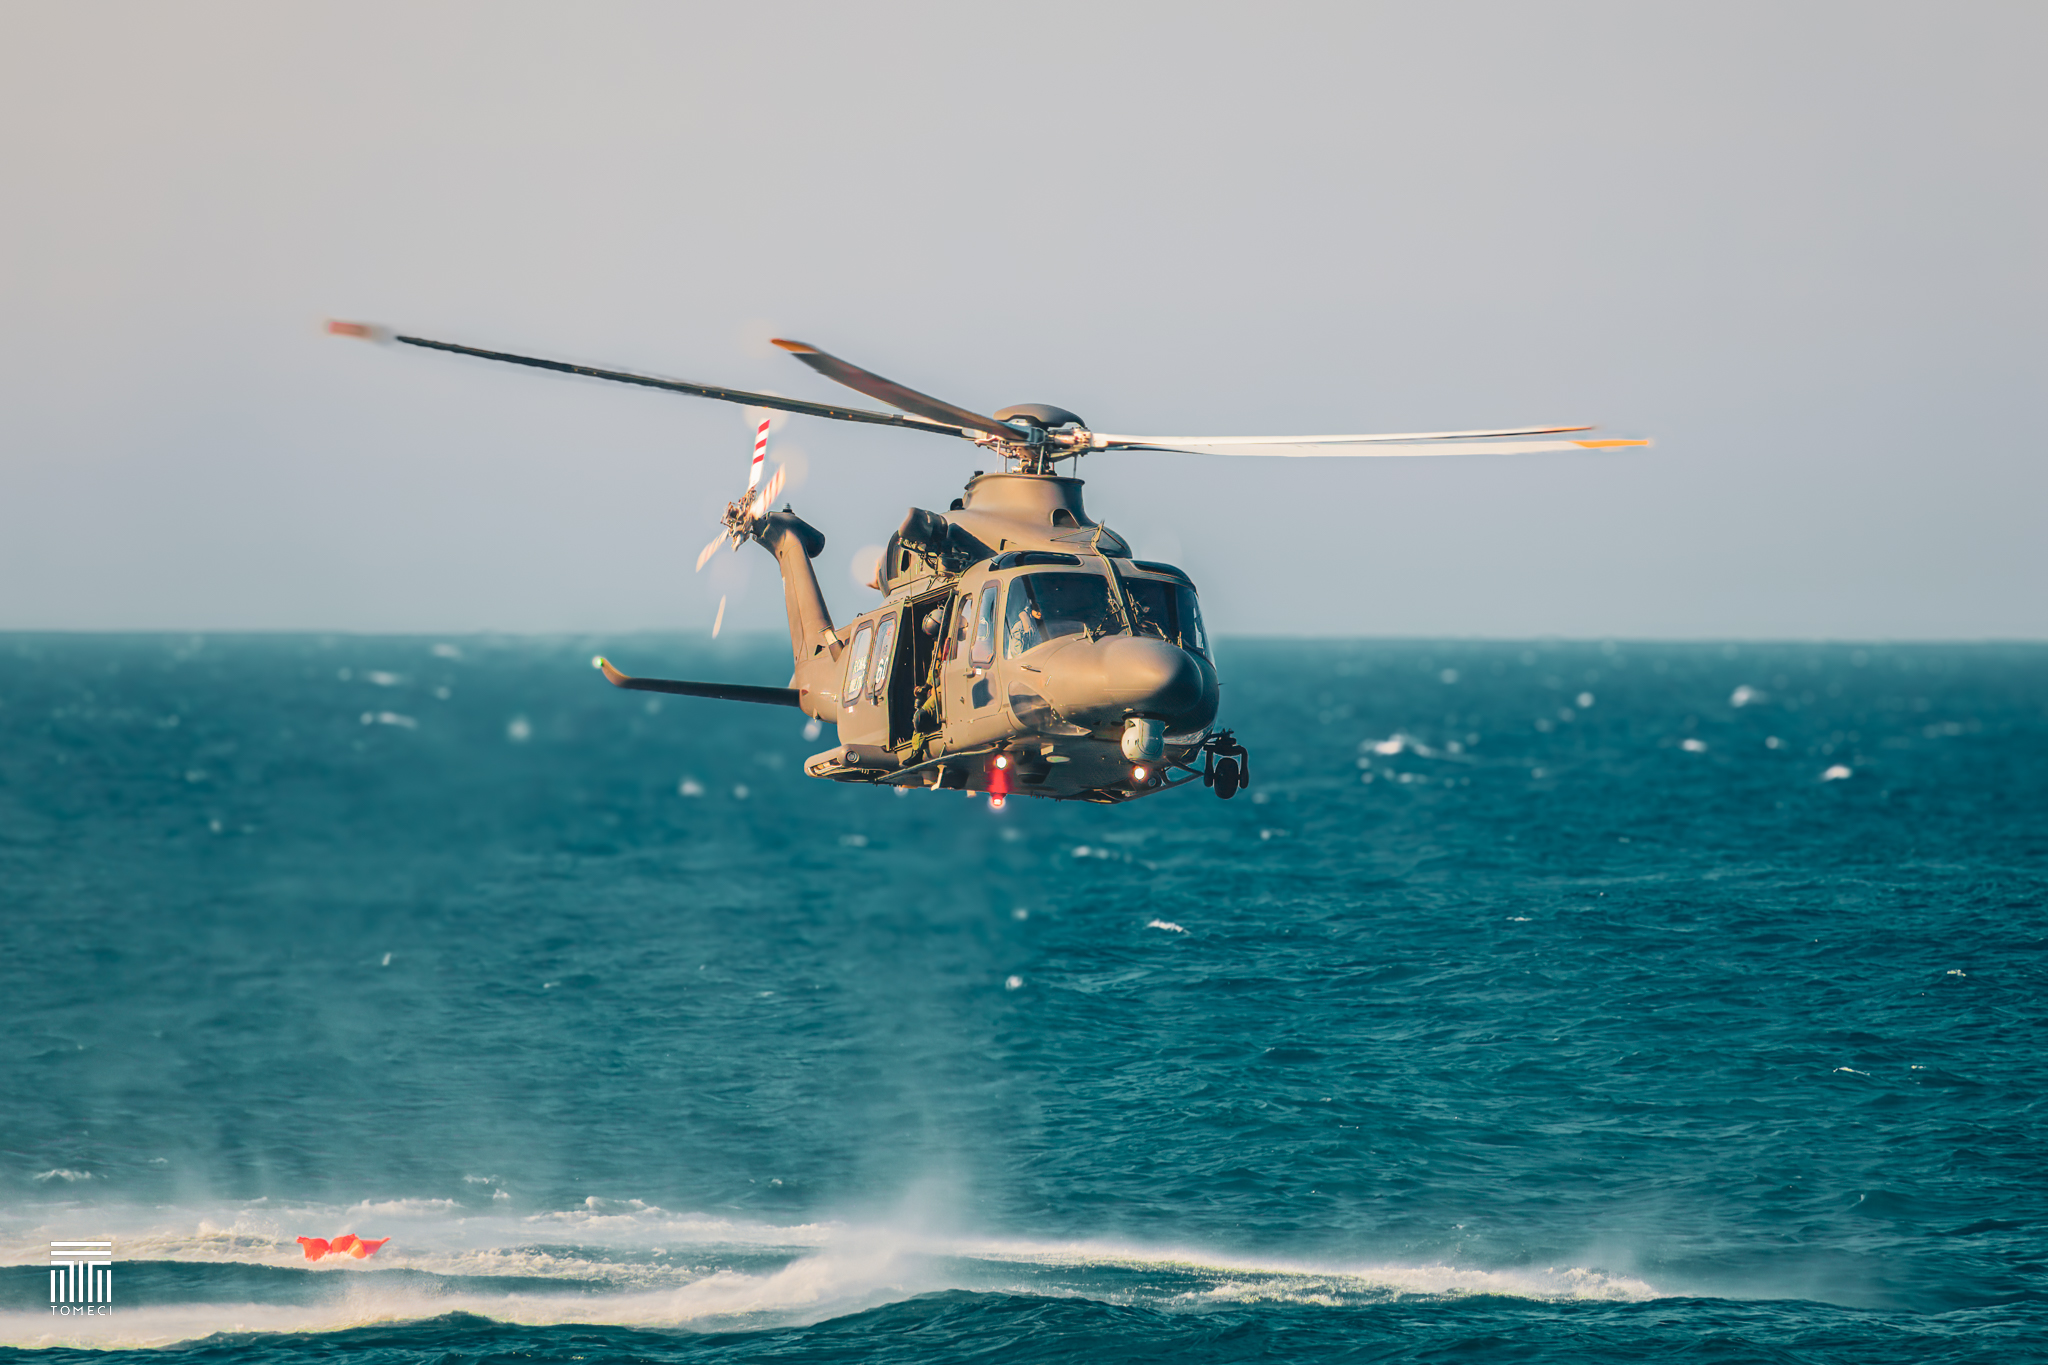 Aeronautica Militare Augusta Westland HH-139A during Search and Rescue demonstrations above the adriatic sea captured by Tomeci